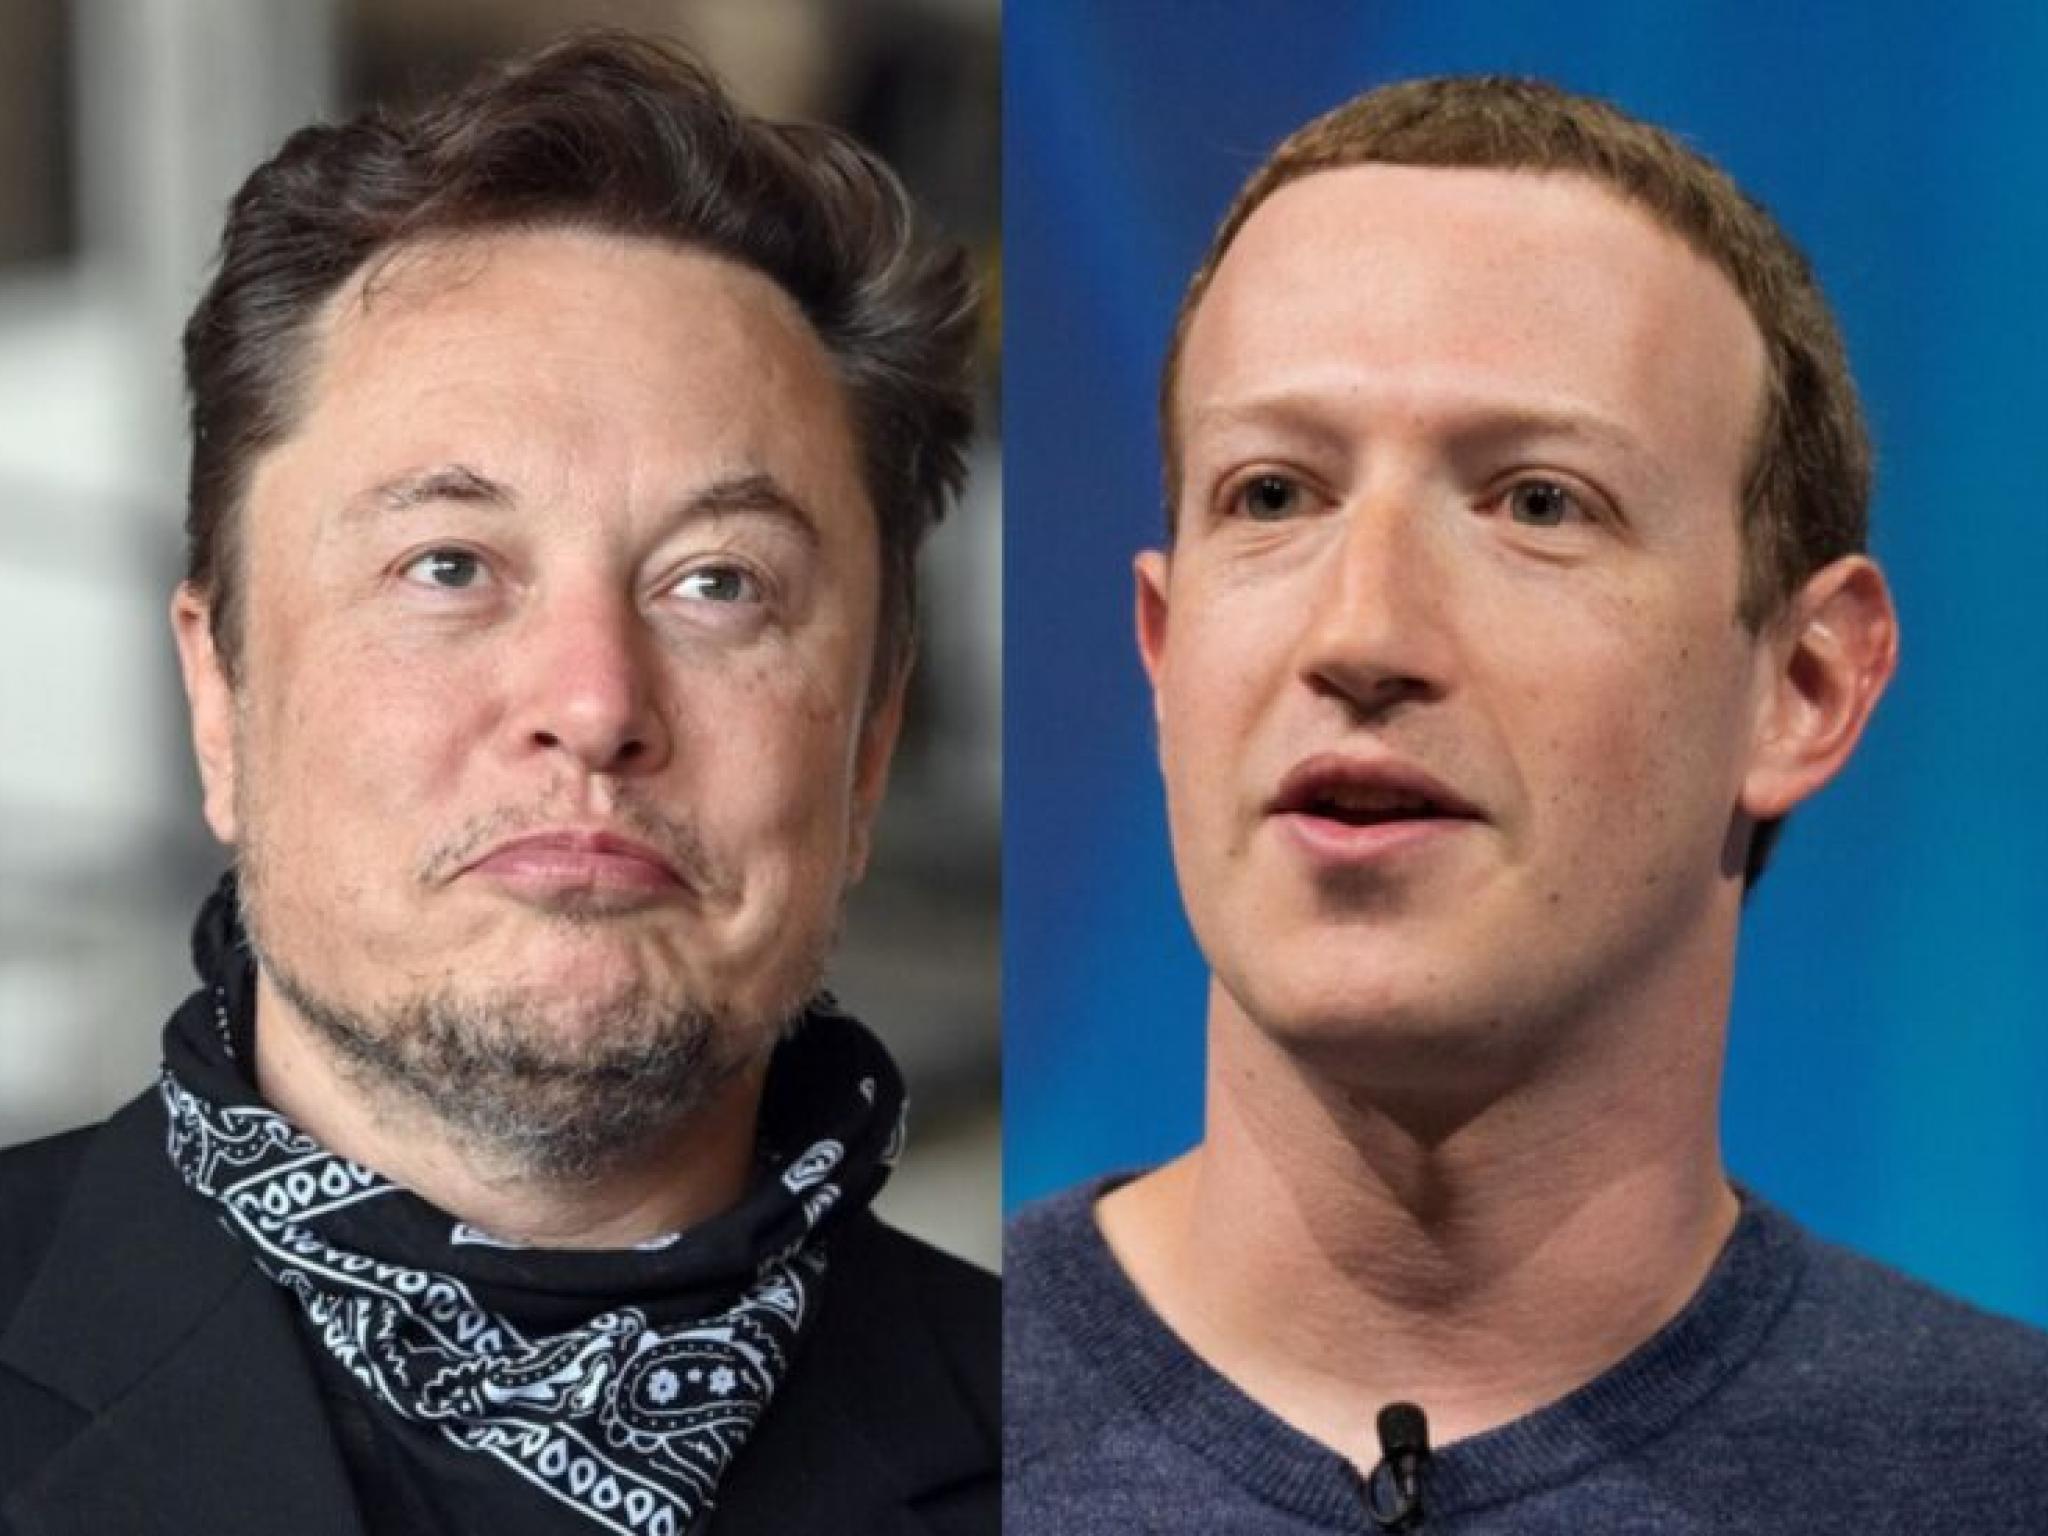  elon-musk-agrees-meta-cant-be-trusted-after-zuckerberg-led-social-media-giant-hit-with-37m-fine-over-data-sharing-practices 